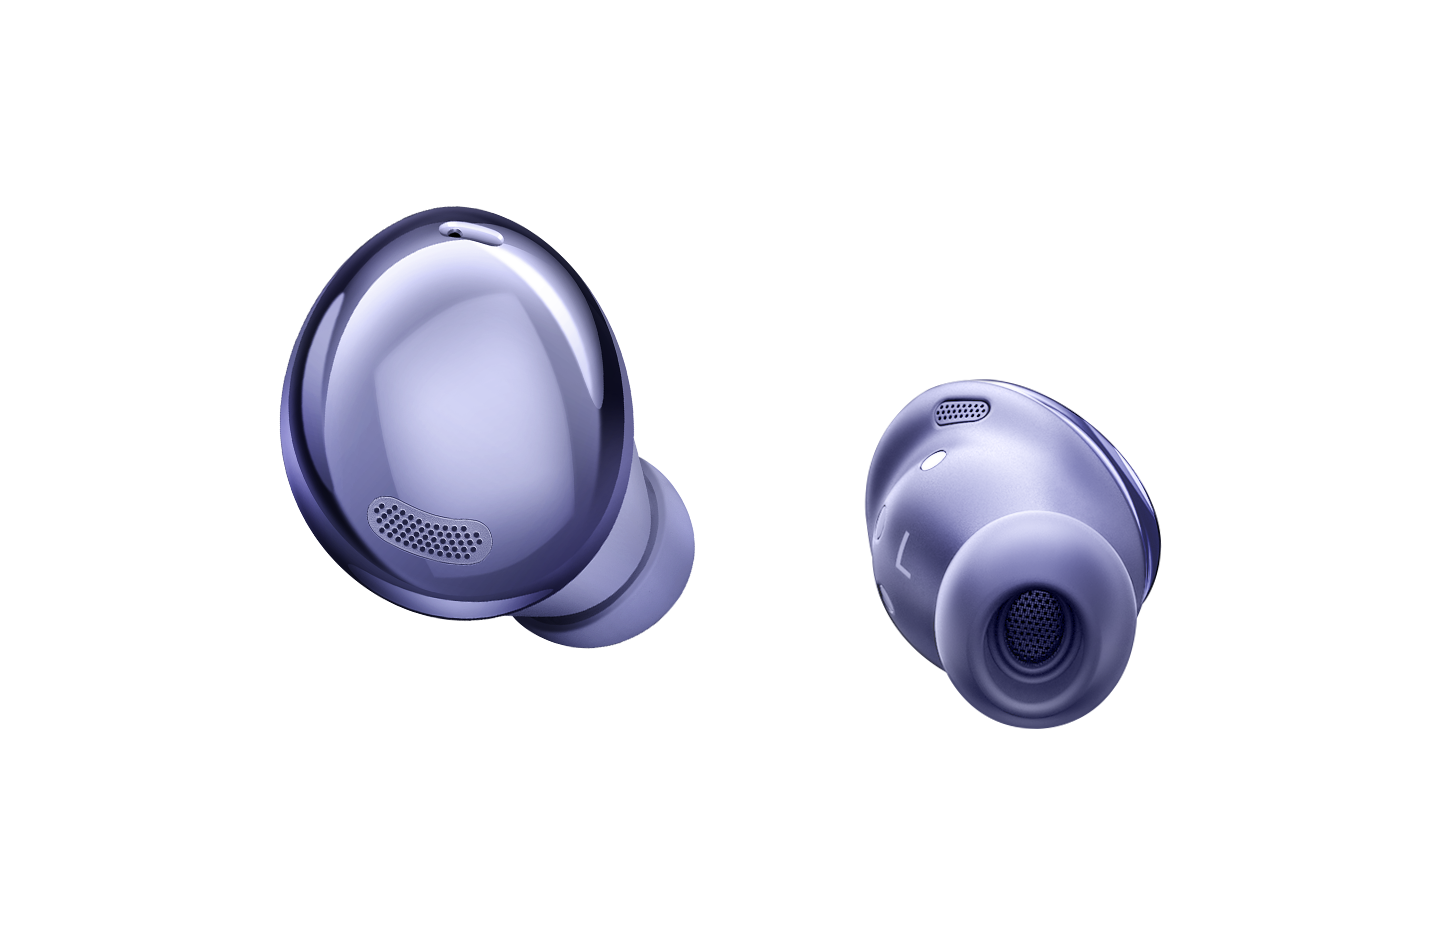 Galaxy Buds Pro earbuds in Phantom Violet is floating with bubbles around it to demonstrate the three-dimensional sound provided by 360 Audio.